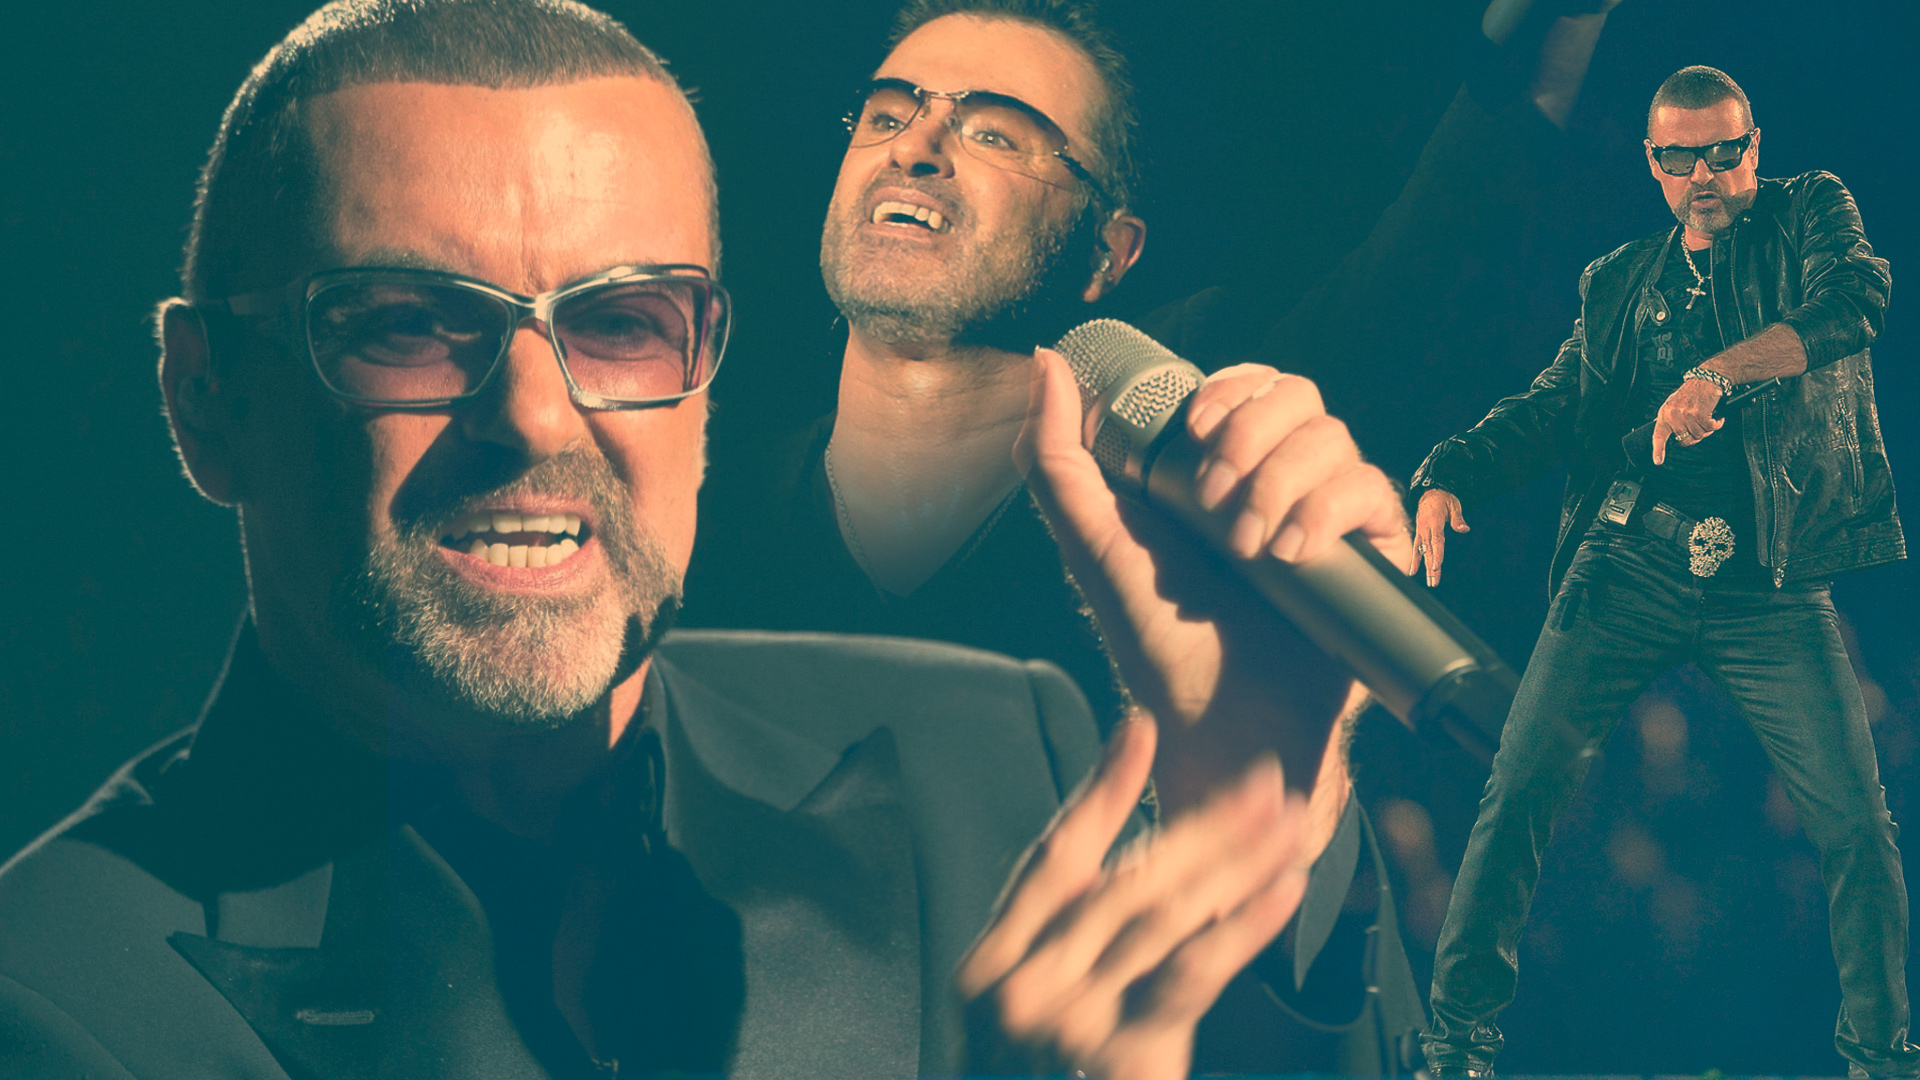 Download free wallpapers for android of george michael youtube